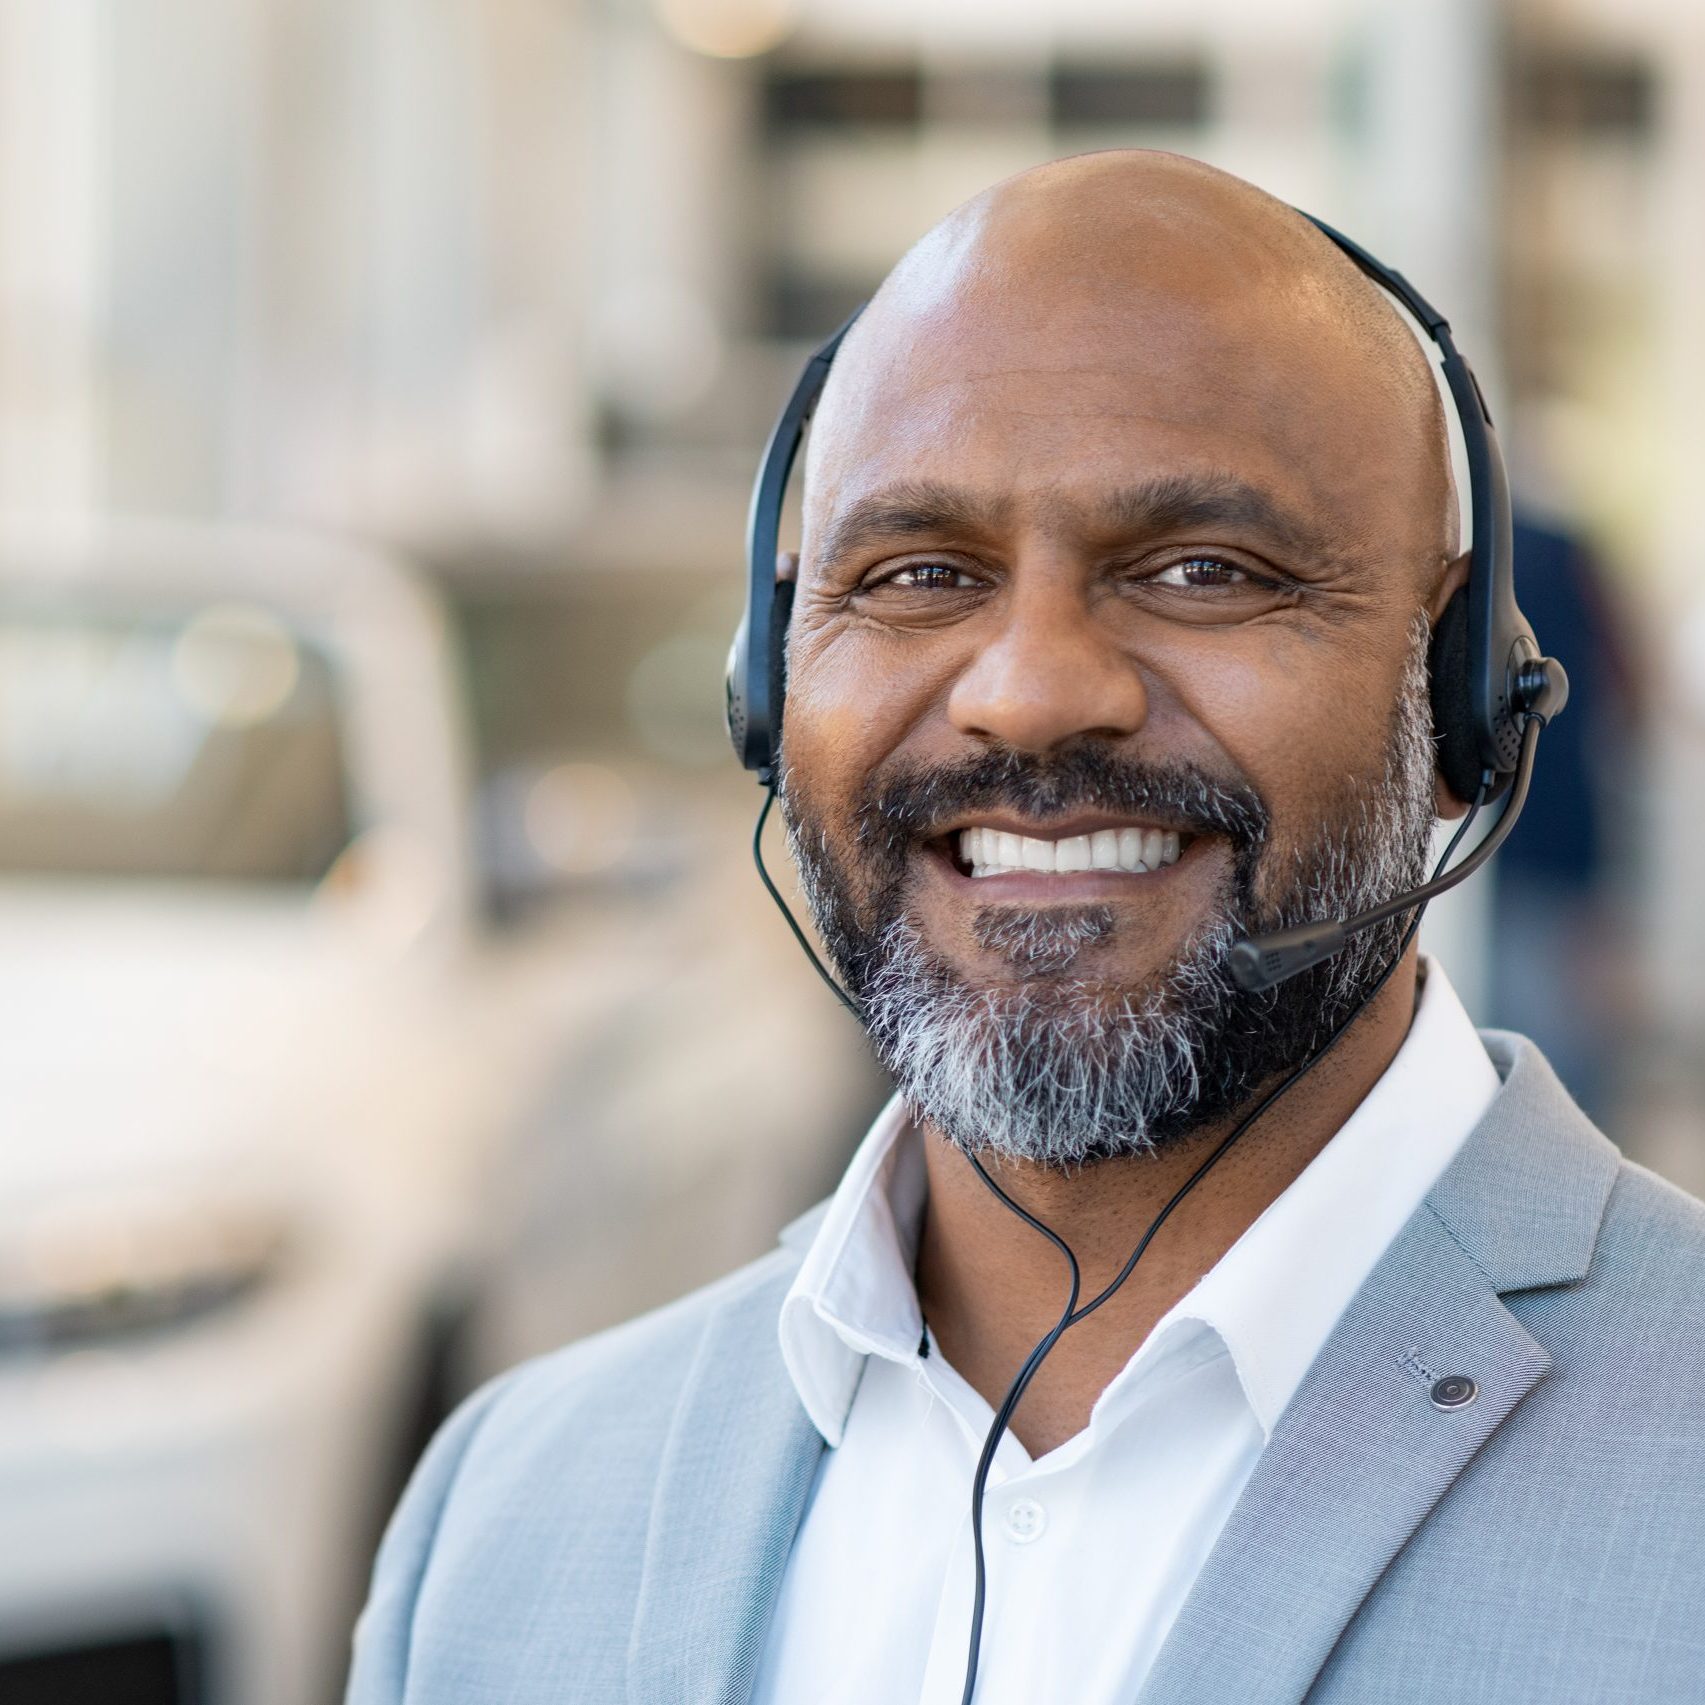 Portrait of mature african consultant man of call center with headset smiling and looking at camera in car showroom. Happy smiling customer support working with headset. Smiling car dealer after sales telephone assistance.